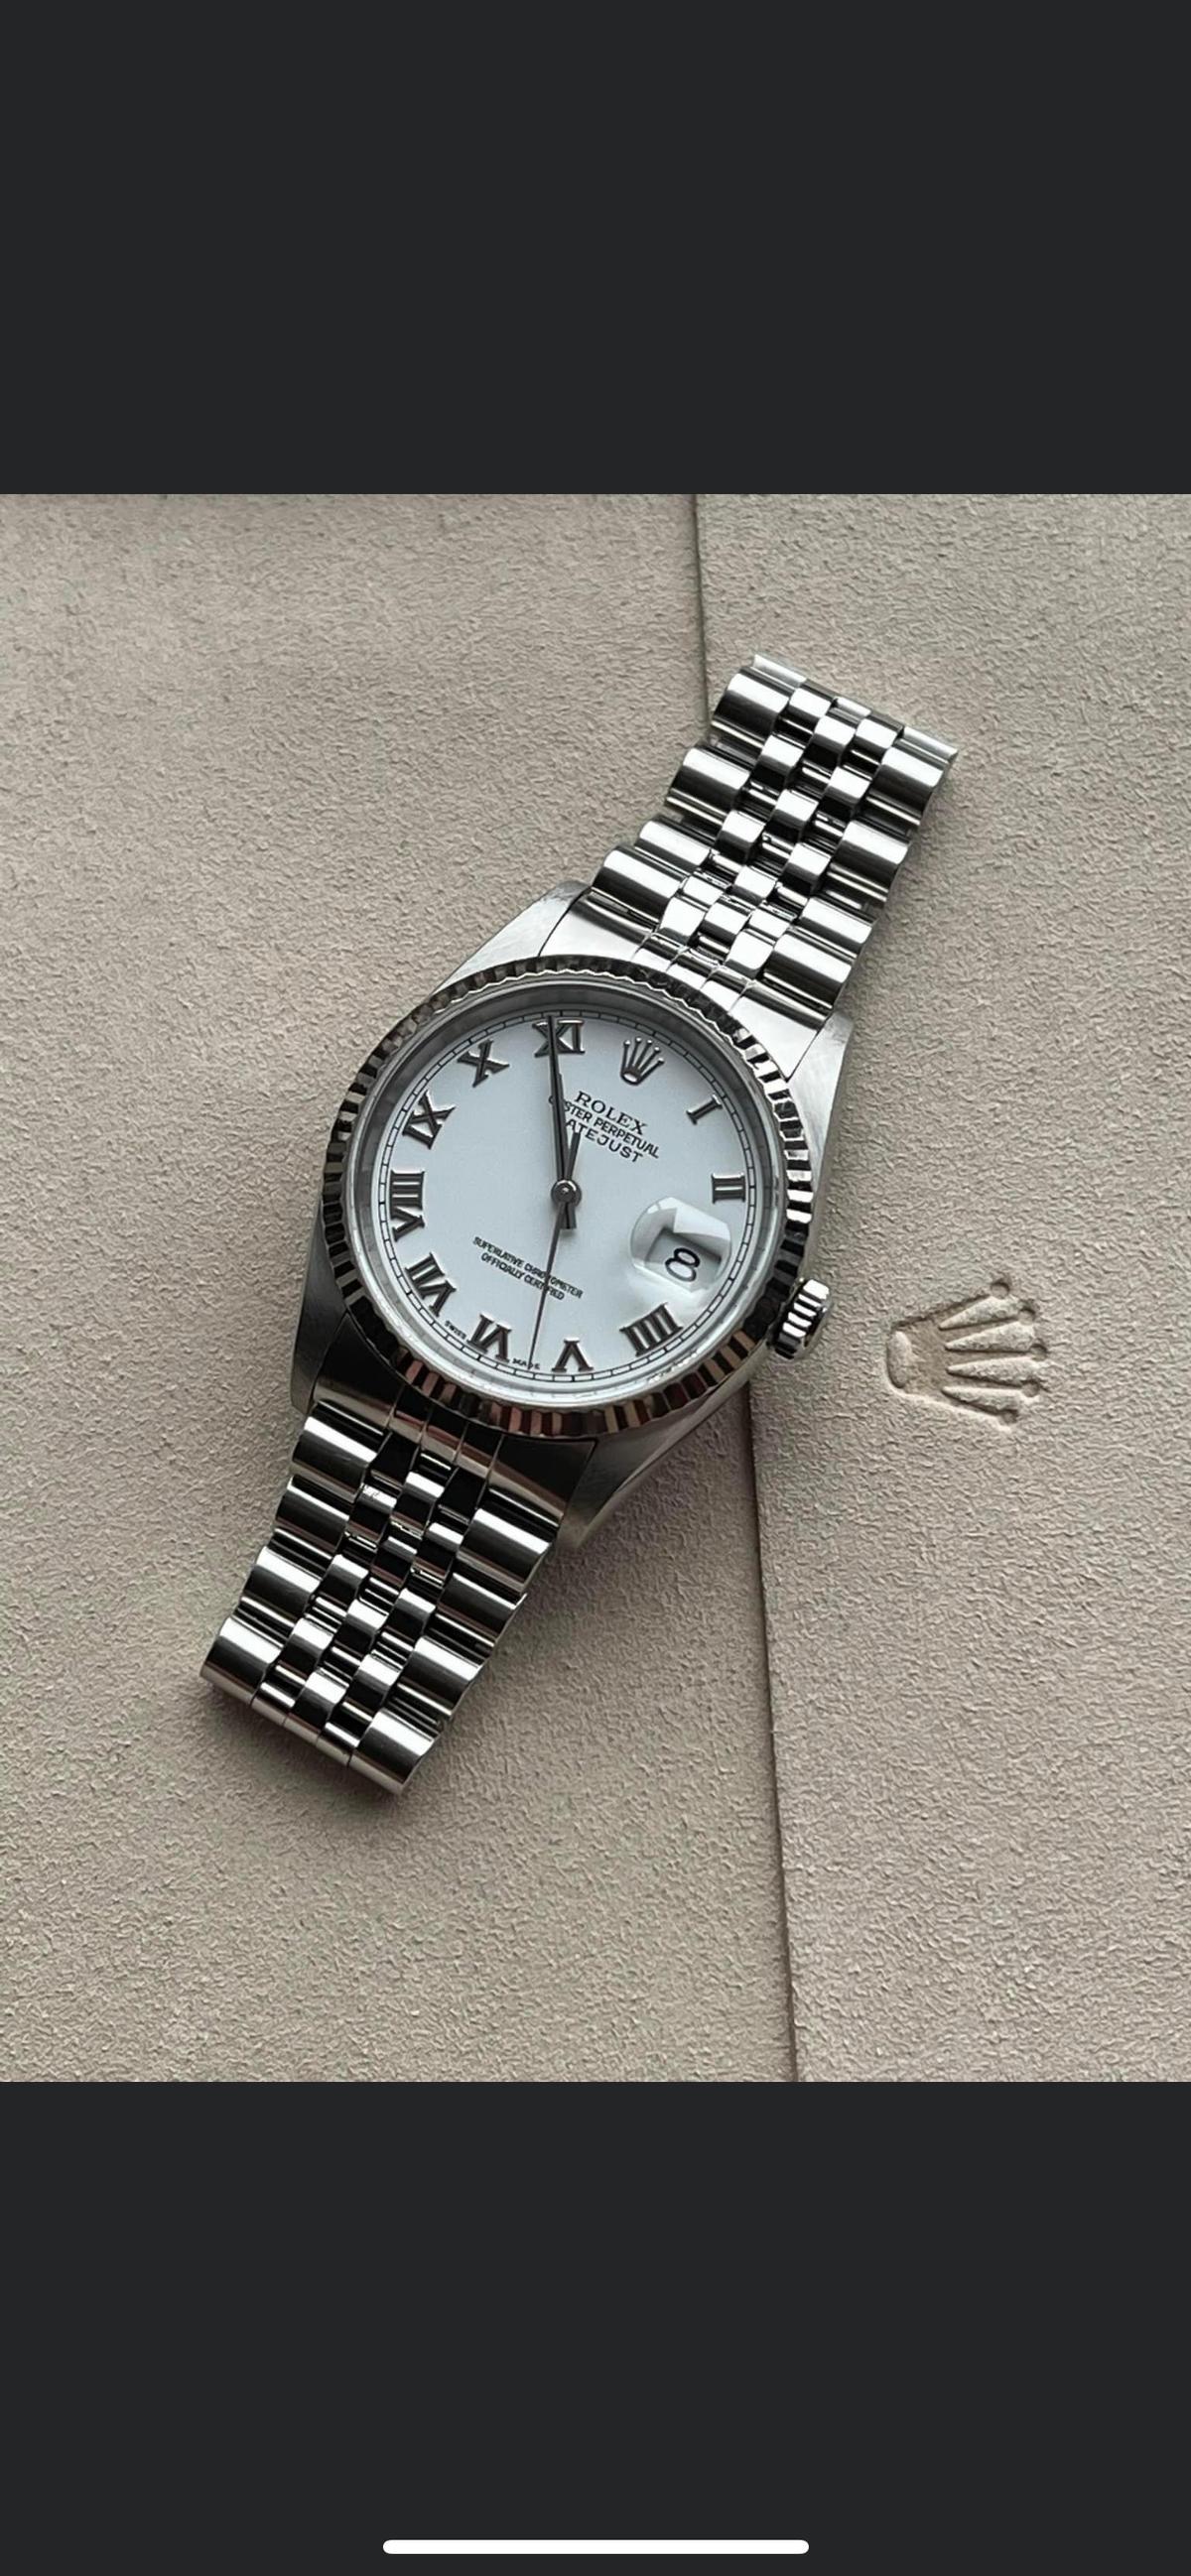 USED 36 MM ROMAN NUMERAL ROLEX DATEJUST IN EXCELLENT CONDITION COMES WITH BOX & APPRAISAL